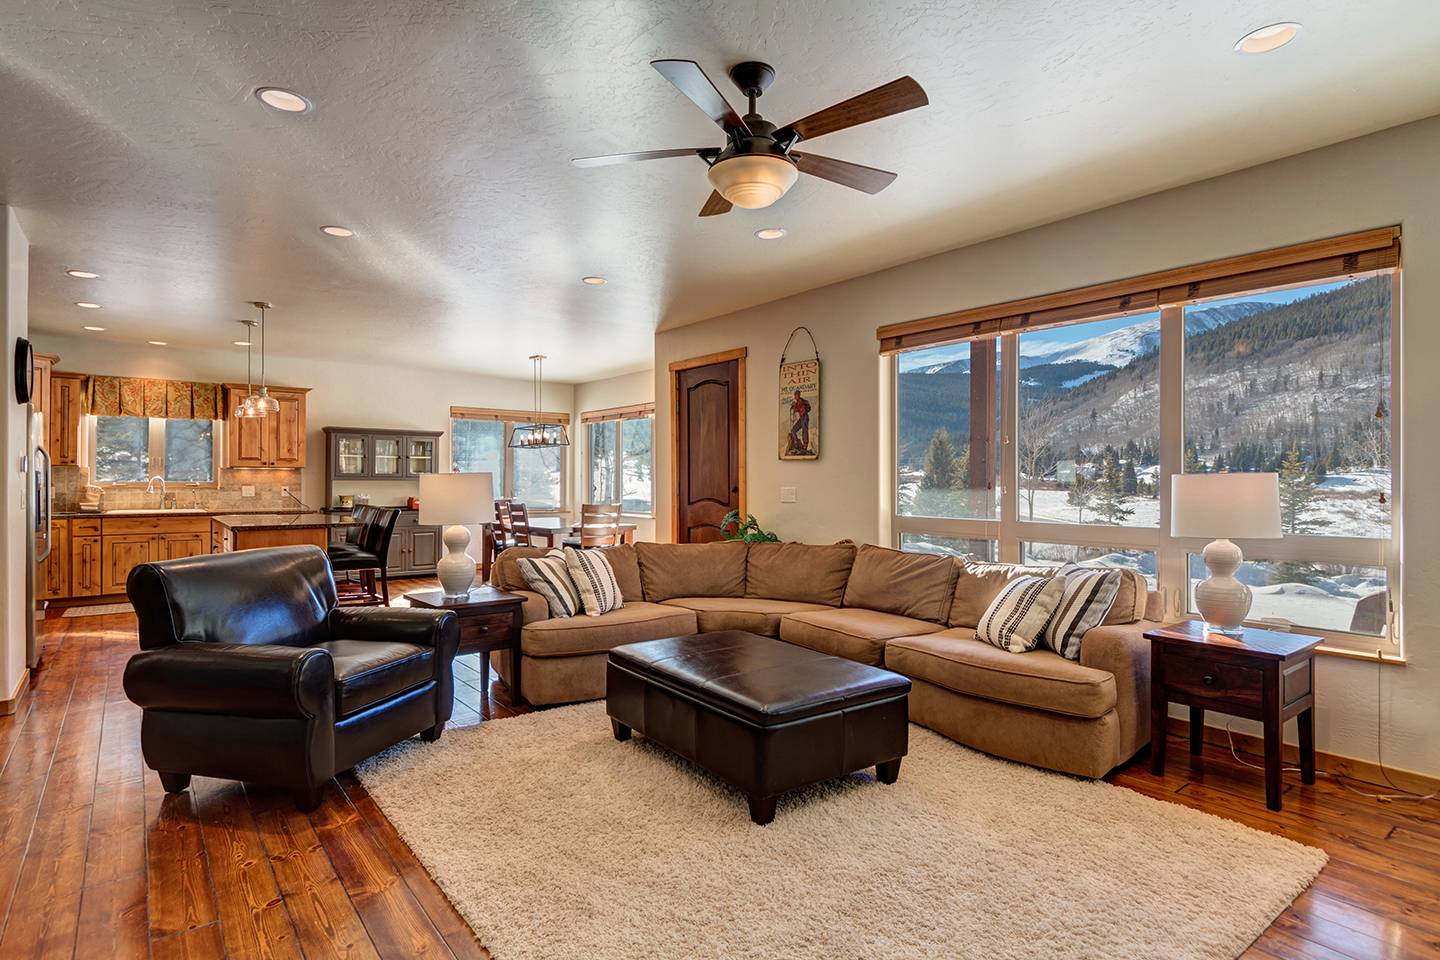 Living room furnishings and window views at Aspen View Retreat.